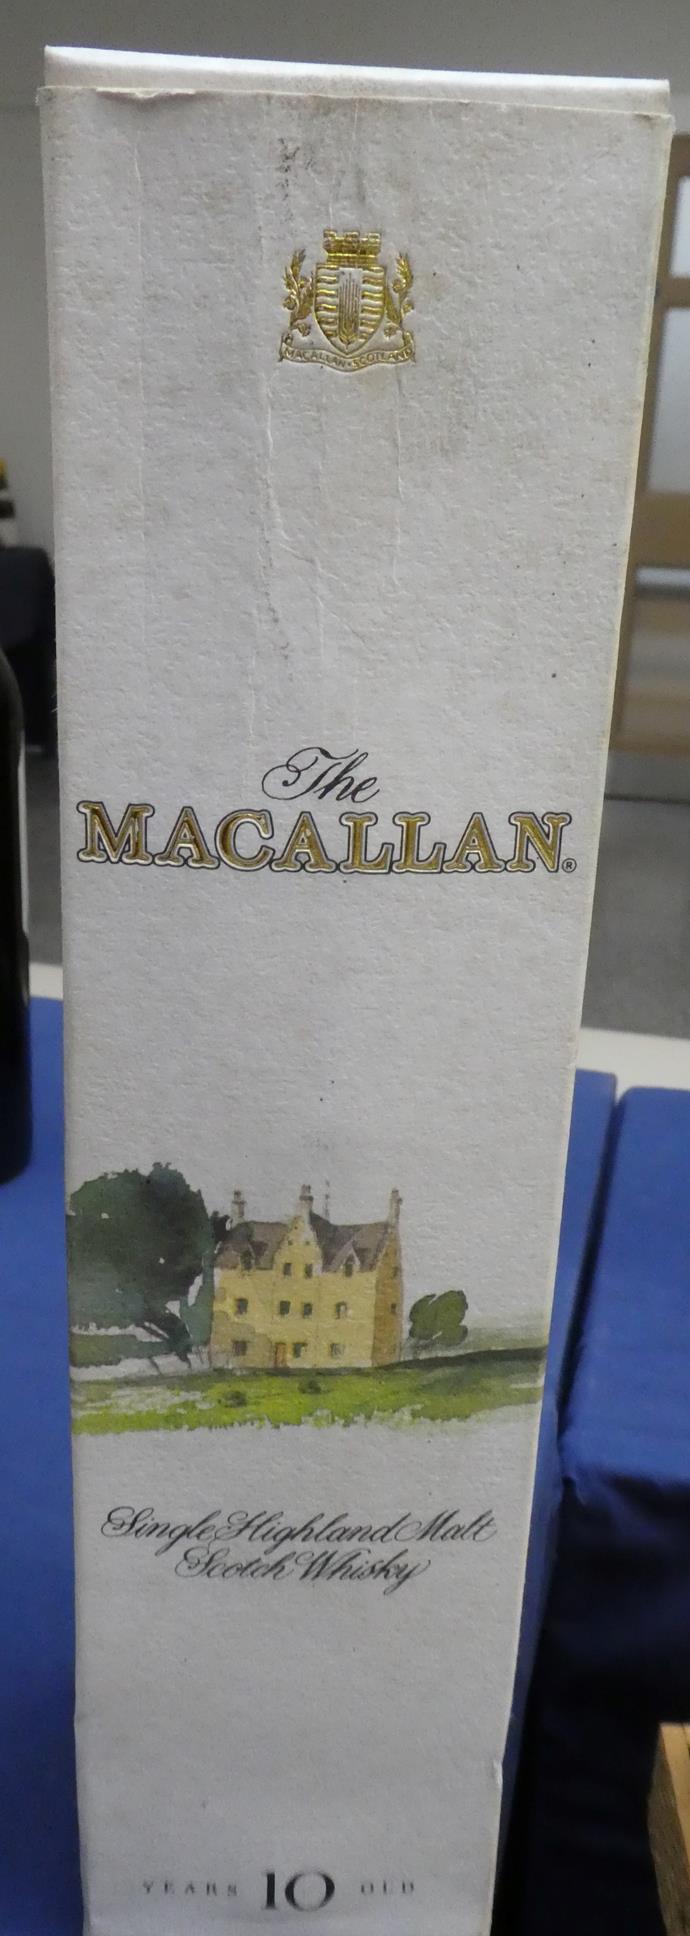 The Macallan 10 Years Old Single Highland Malt Scotch Whisky, 1990s bottling, 40% vol 70cl, in - Image 4 of 8